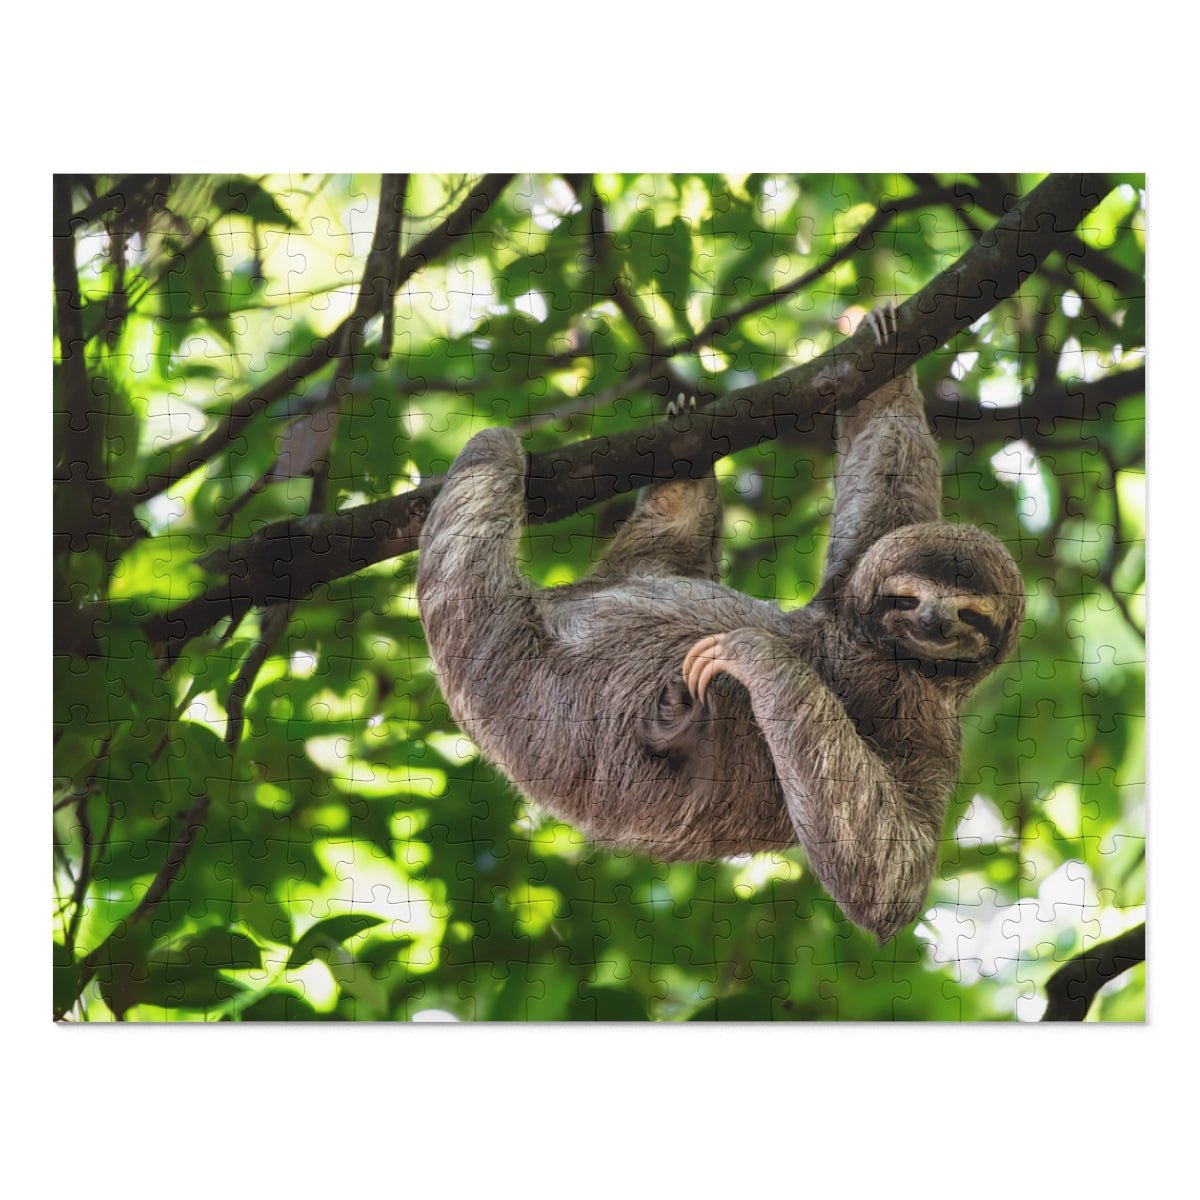 Cute Hanging Sloth Jigsaw Puzzle - Puffin Lime